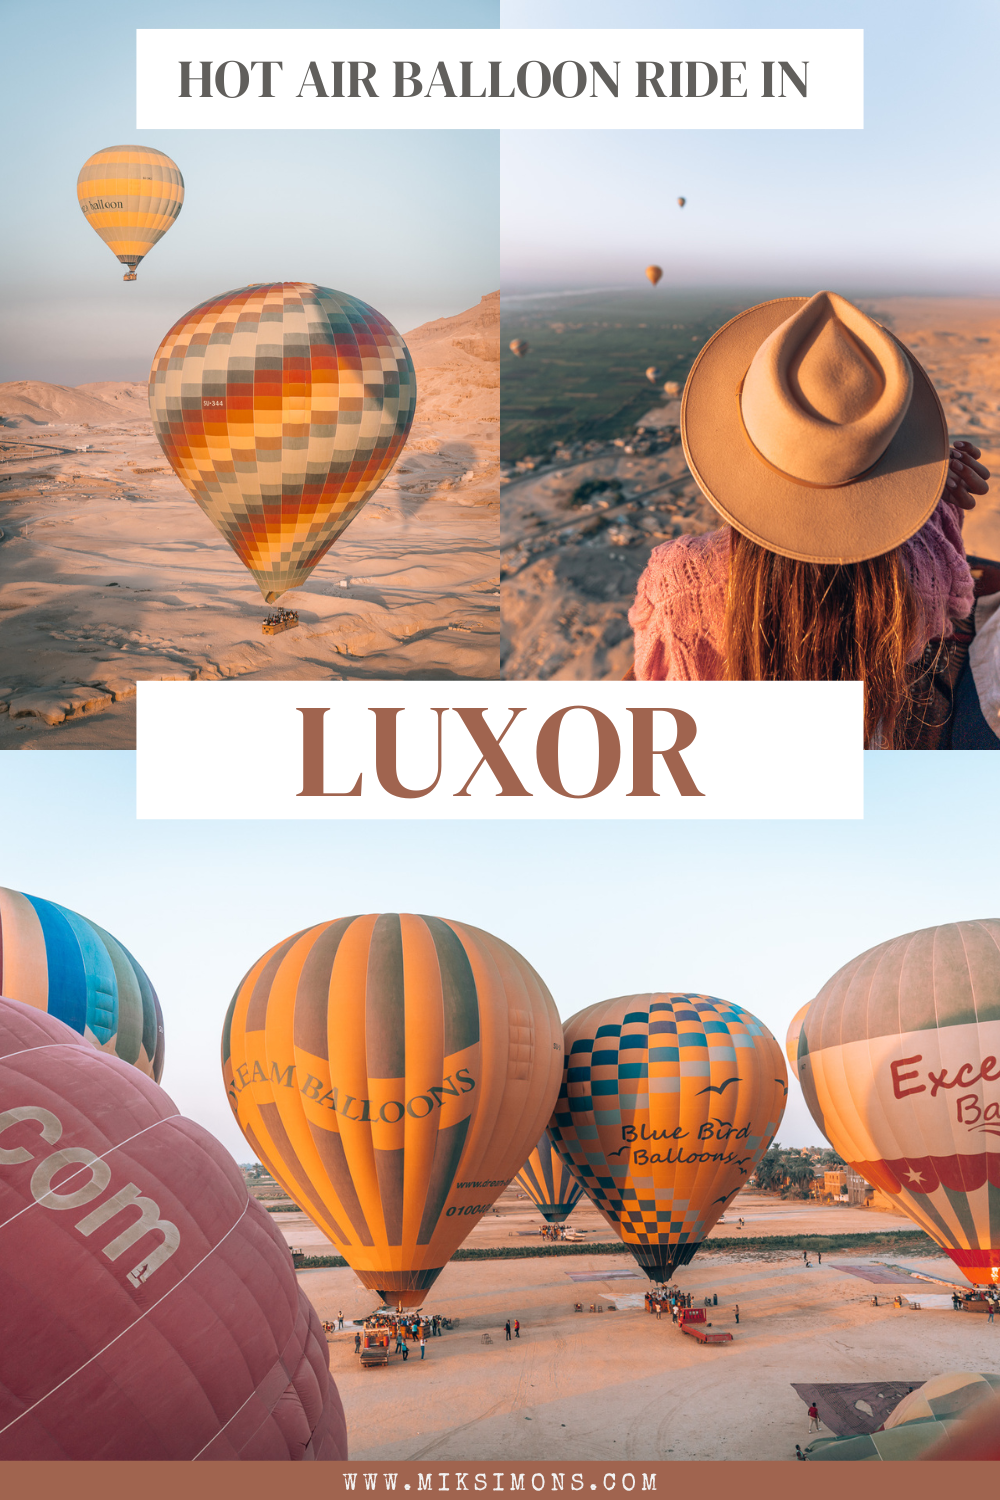 Hot air balloon ride in Luxor - Adventure in Egypt